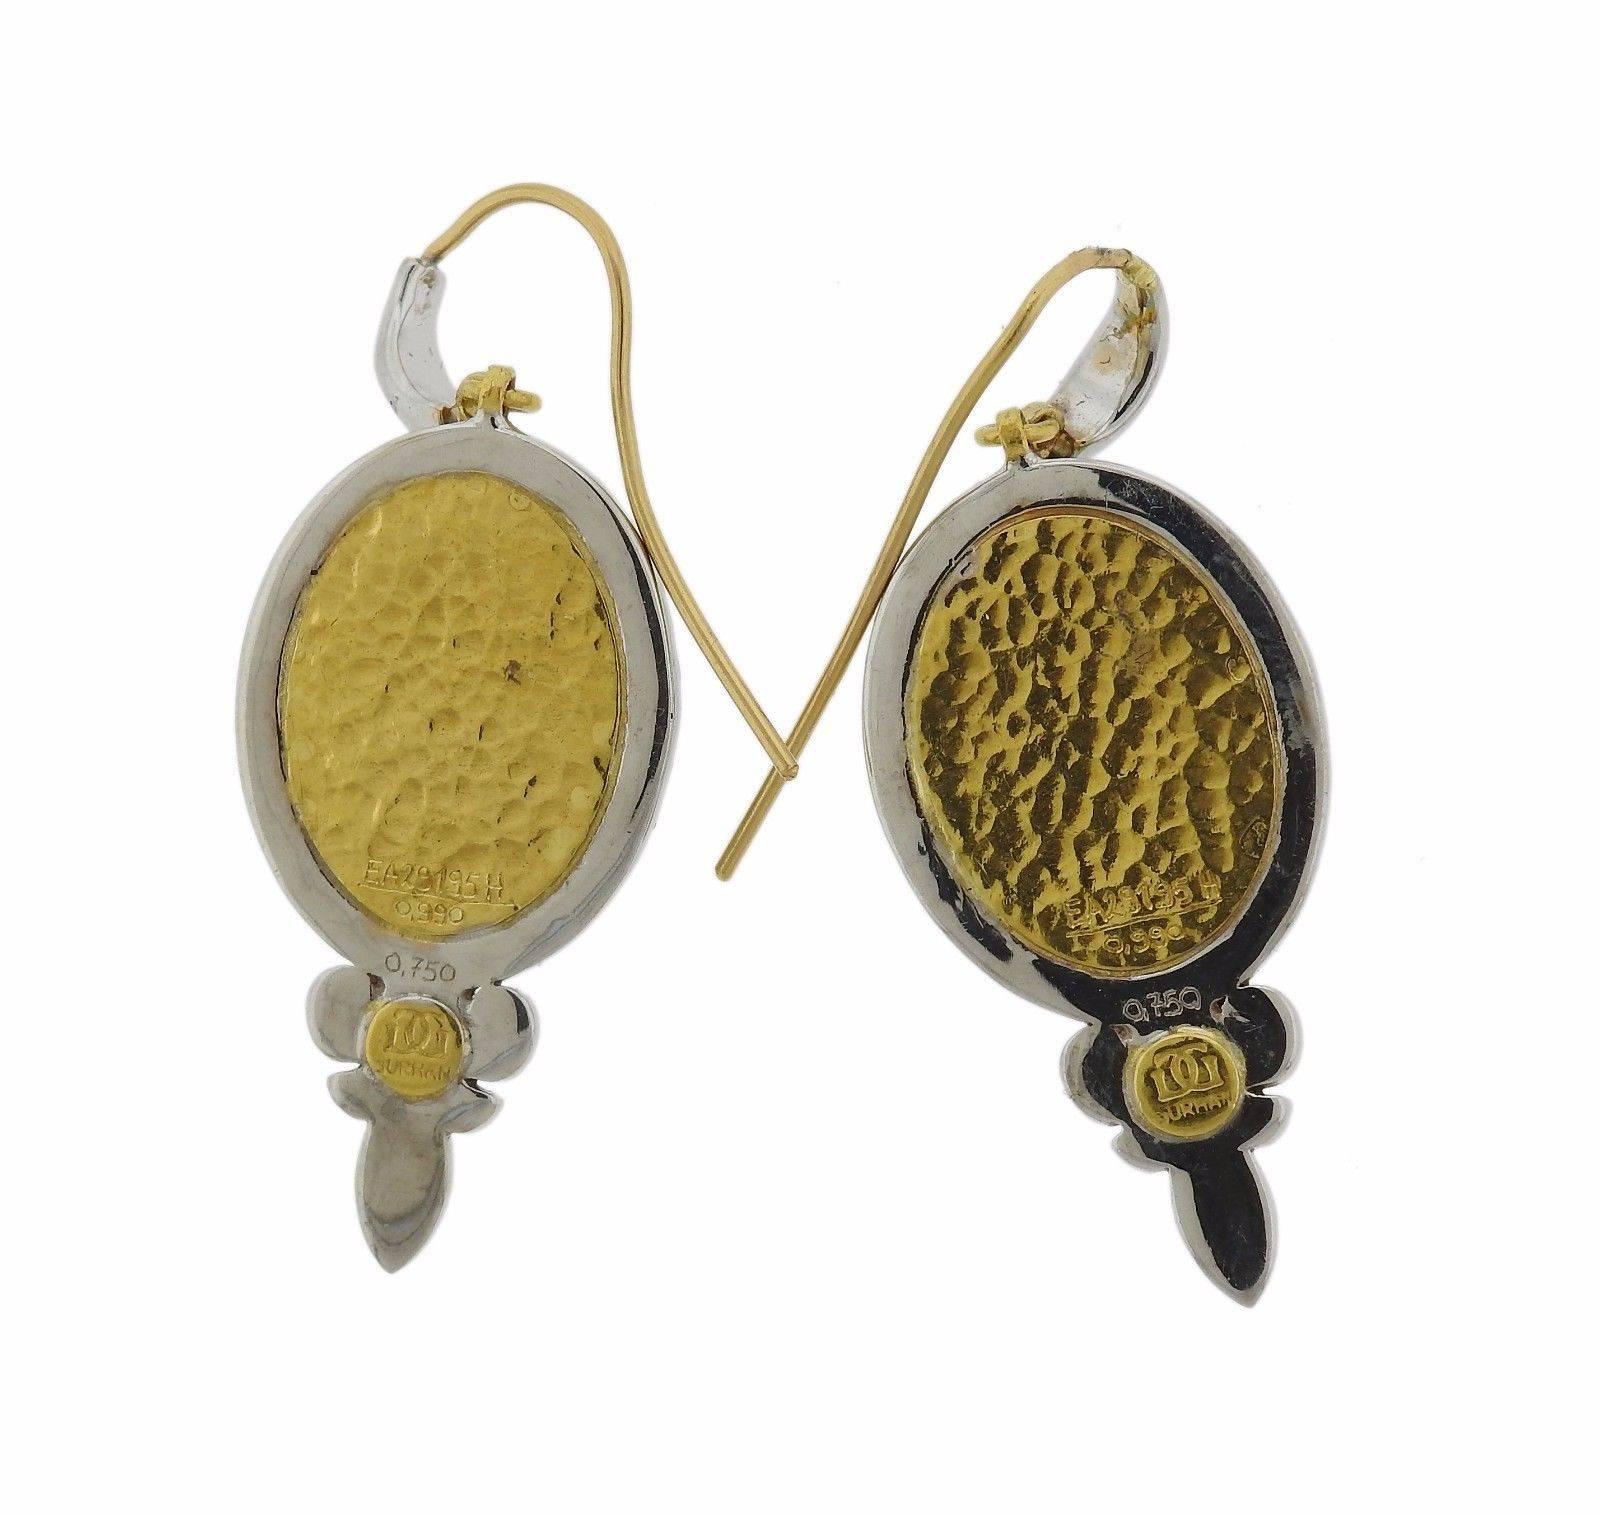 A pair of 18k and 24k gold earrings set with turquoise cabochons and approximately 1.84ctw of G/VS diamonds.  The earrings measure 45mm x 28mm and weigh 16.6 grams.  Marked: Gurhan mark, 0.990, 0.750, EA29195H. 